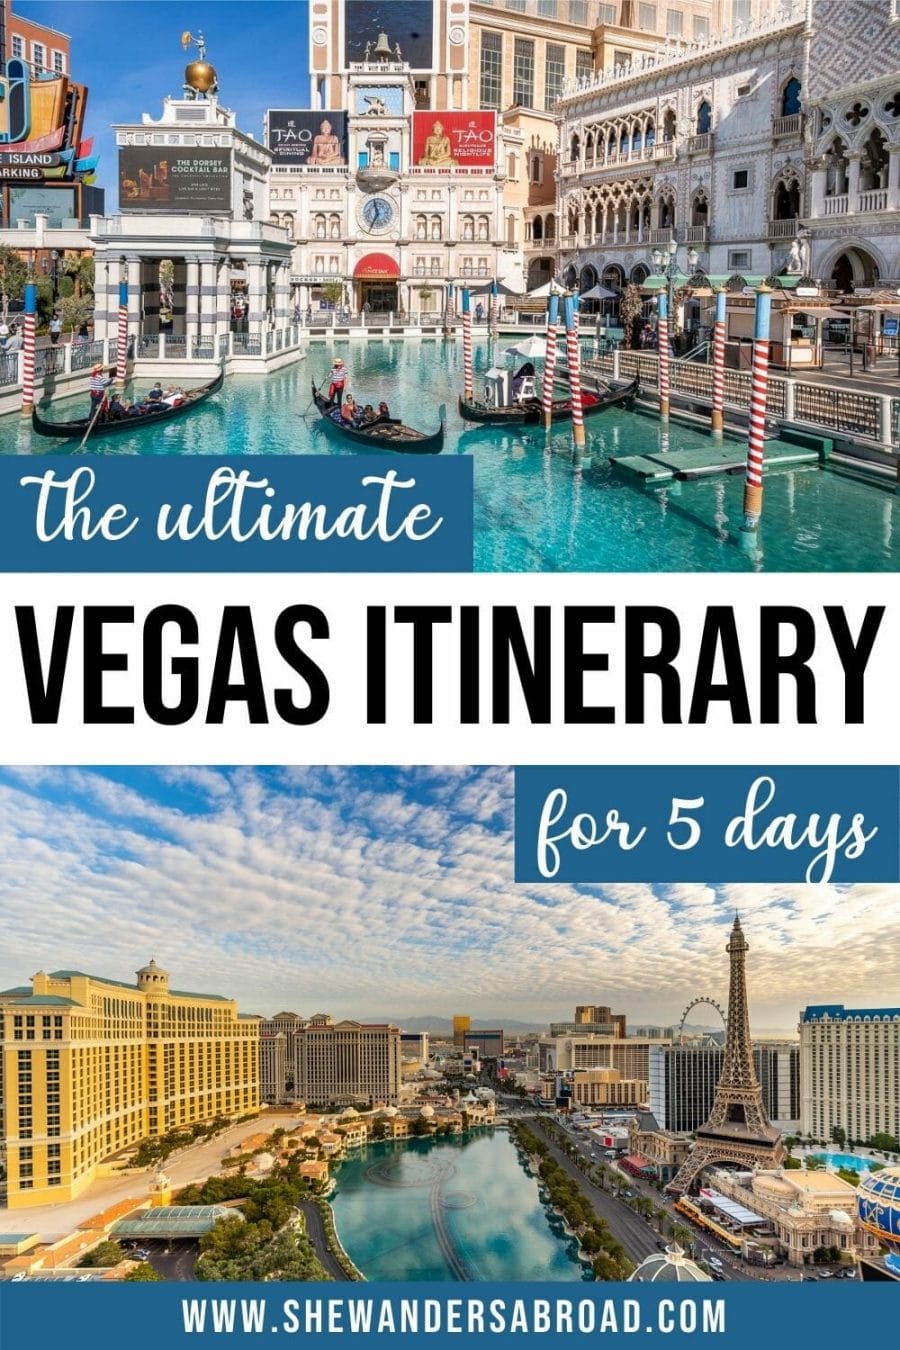 The Perfect 5 Day Las Vegas Itinerary for Adventure Lovers